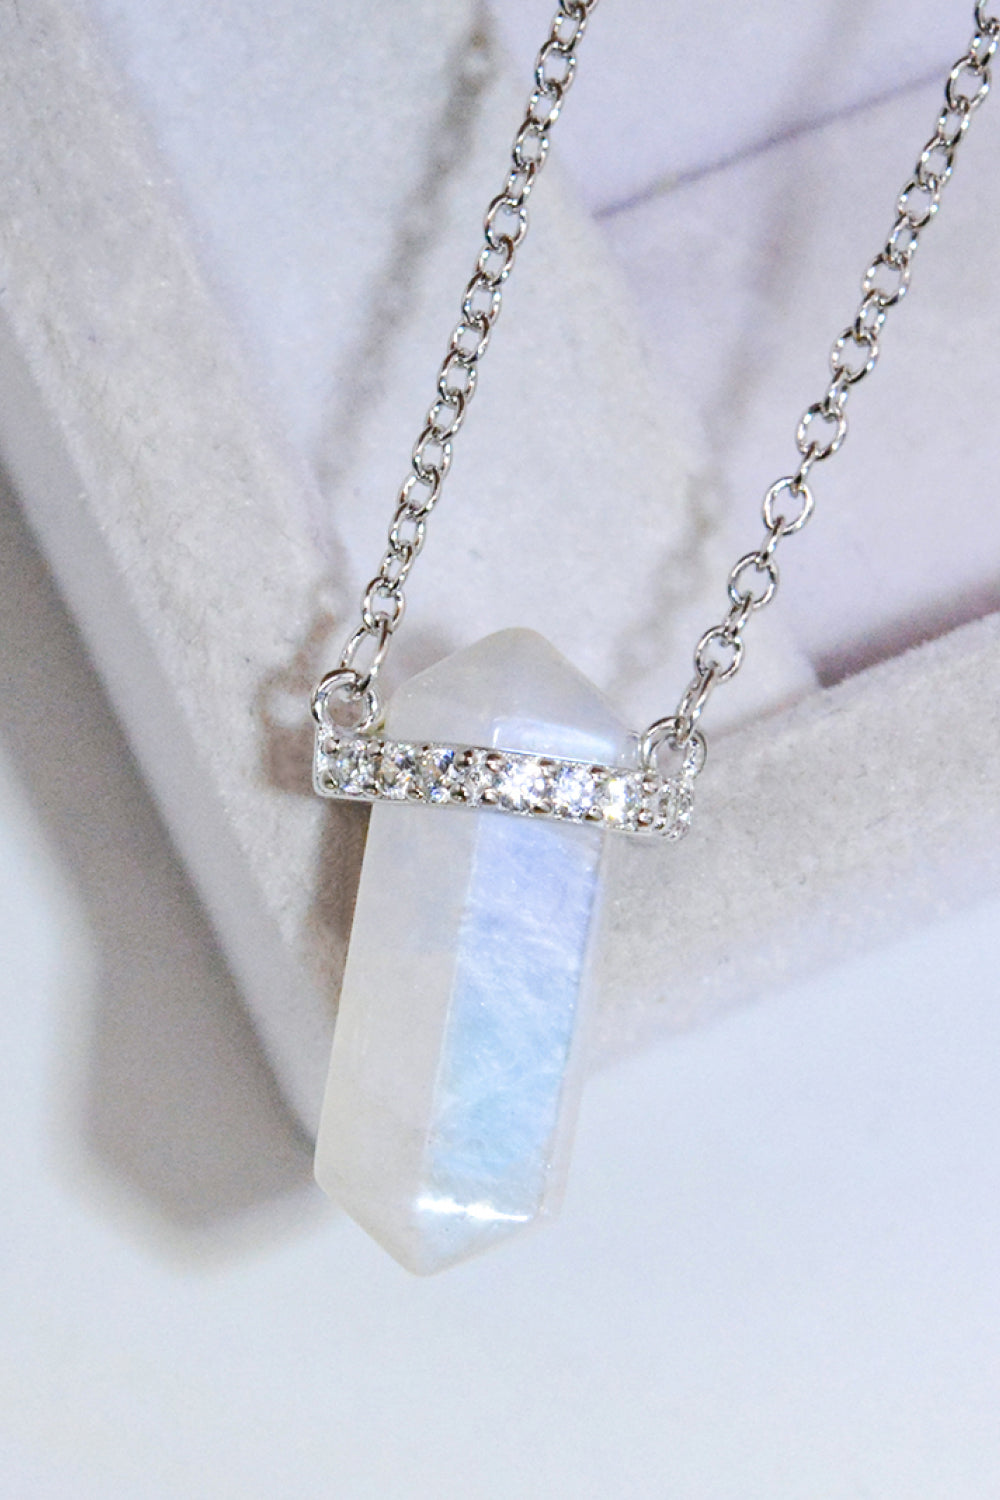 Moonstone Necklace: A necklace featuring a moonstone, known for its ethereal and iridescent quality, creating a mystical and elegant piece of jewelry.